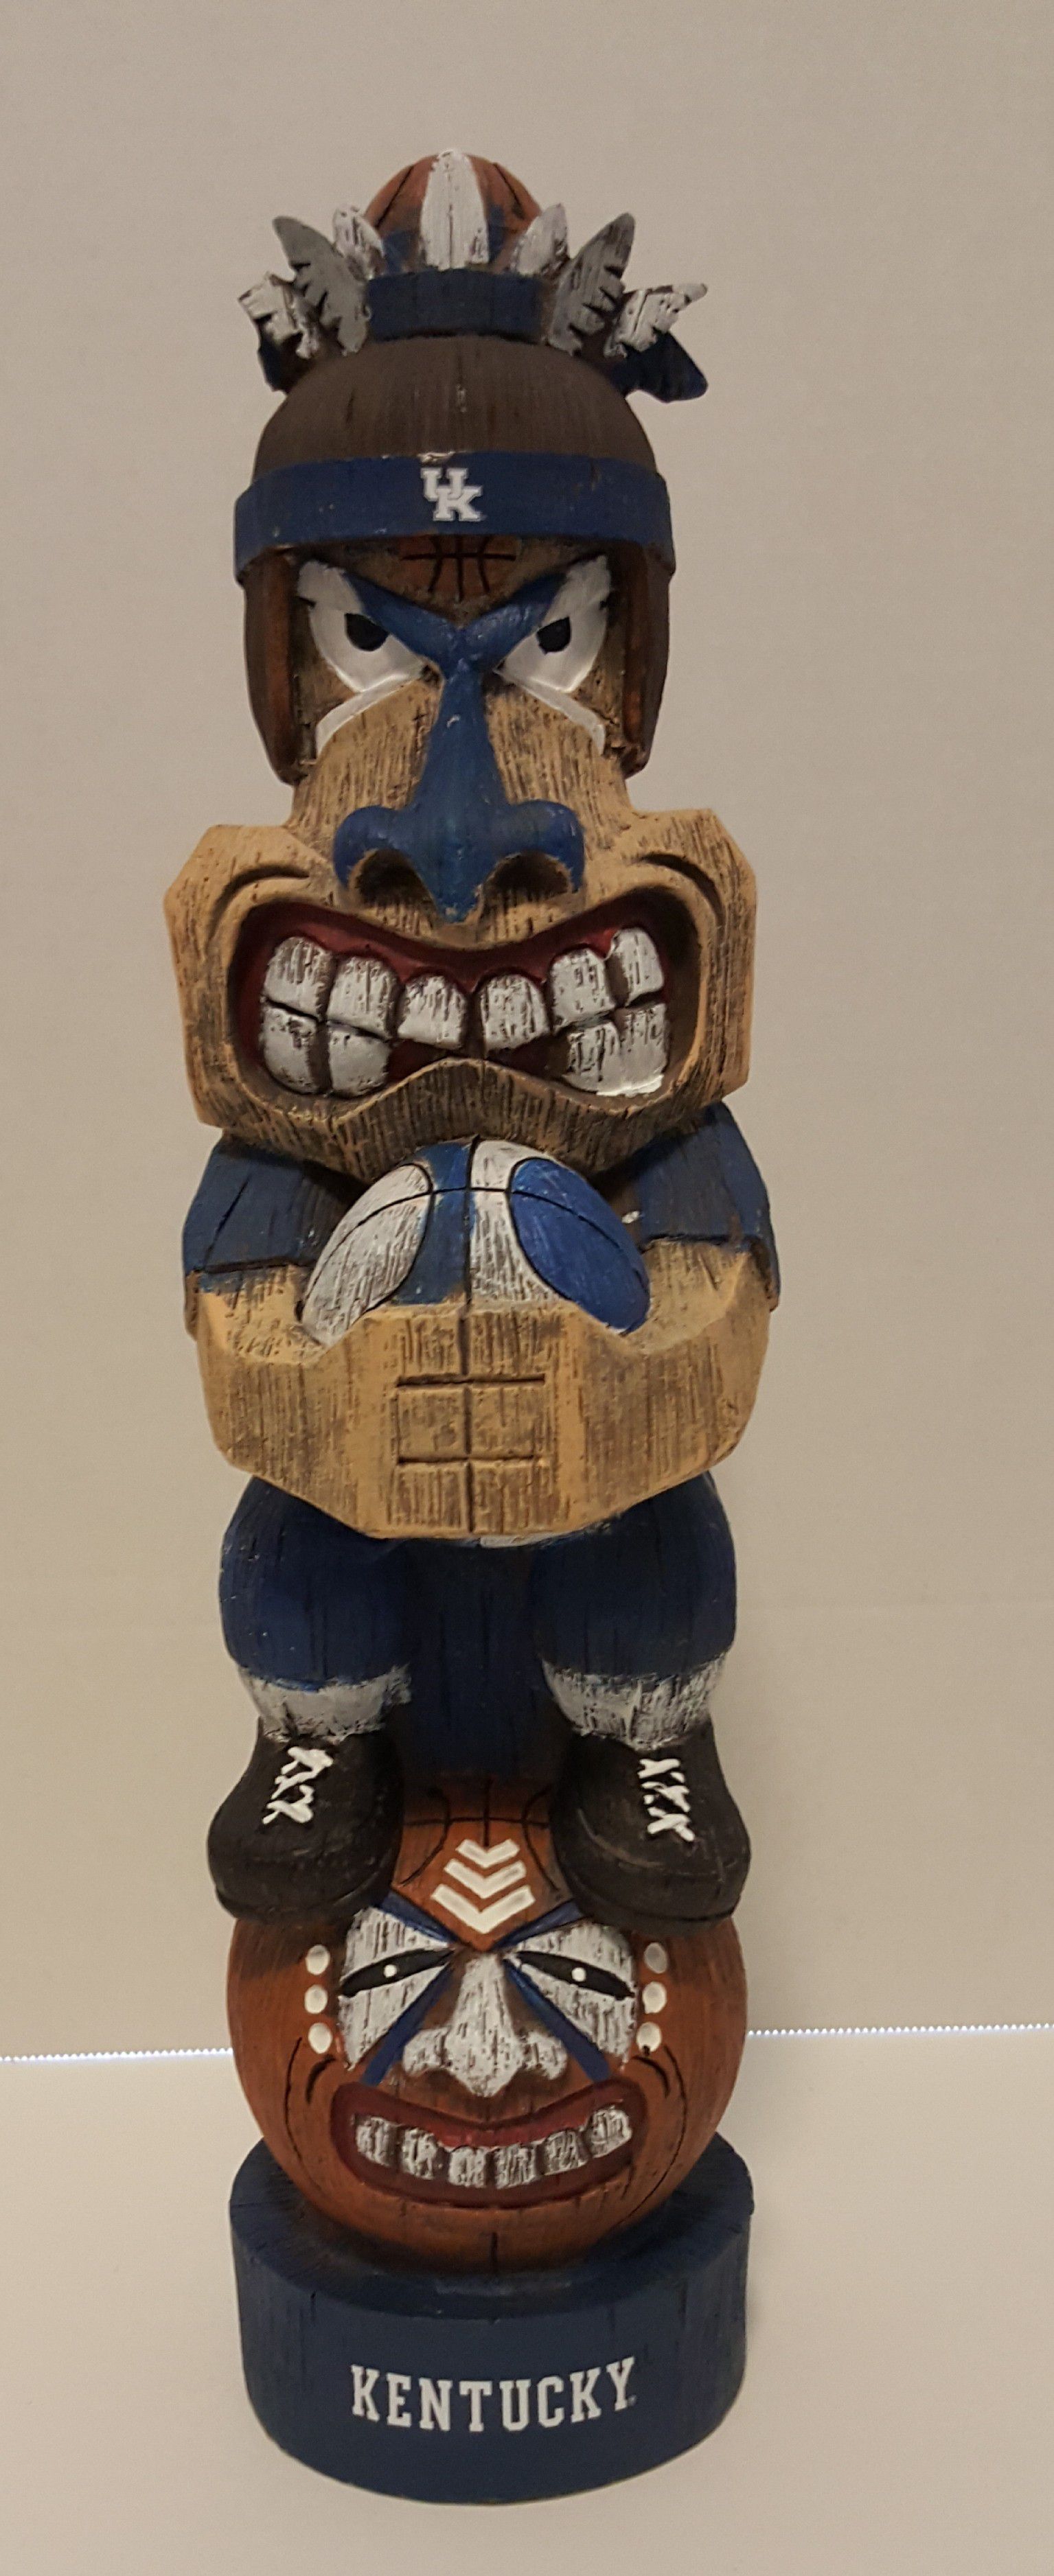 KY WILDCATS BASKETBALL TOTEM BRAND NEW!